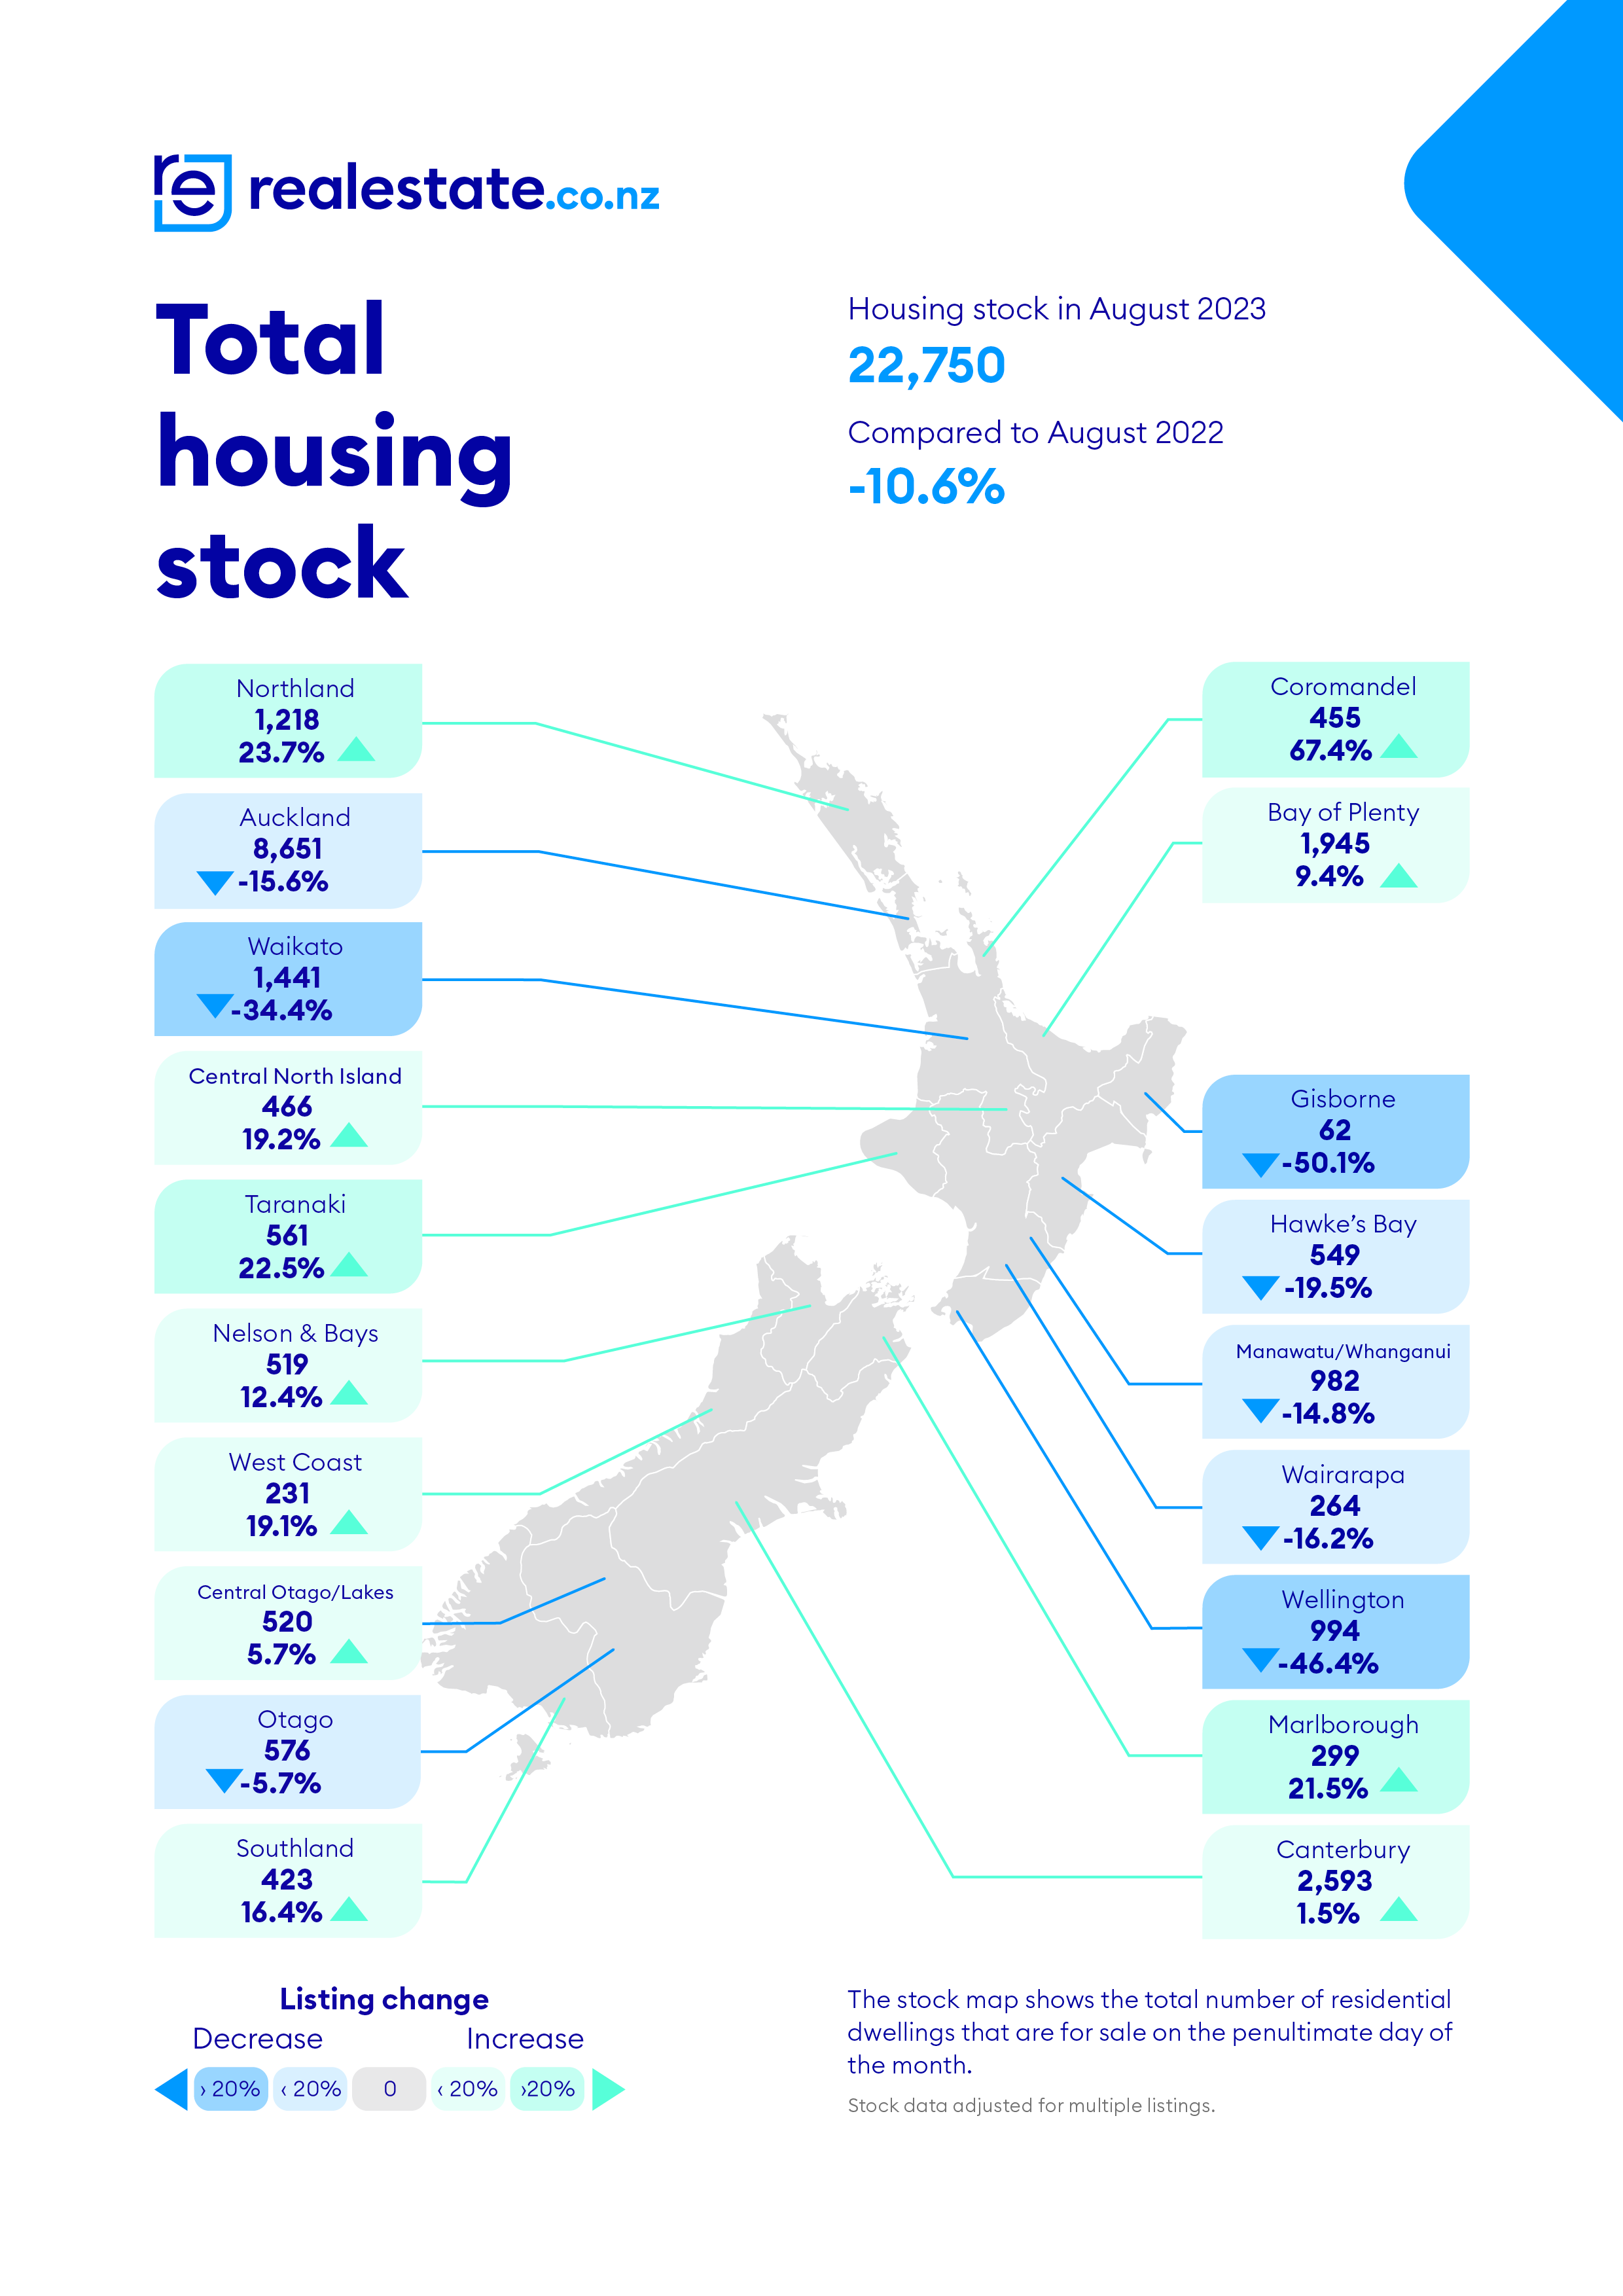 realestate.co.nz Housing Stock August 2023 realestate.co.nz